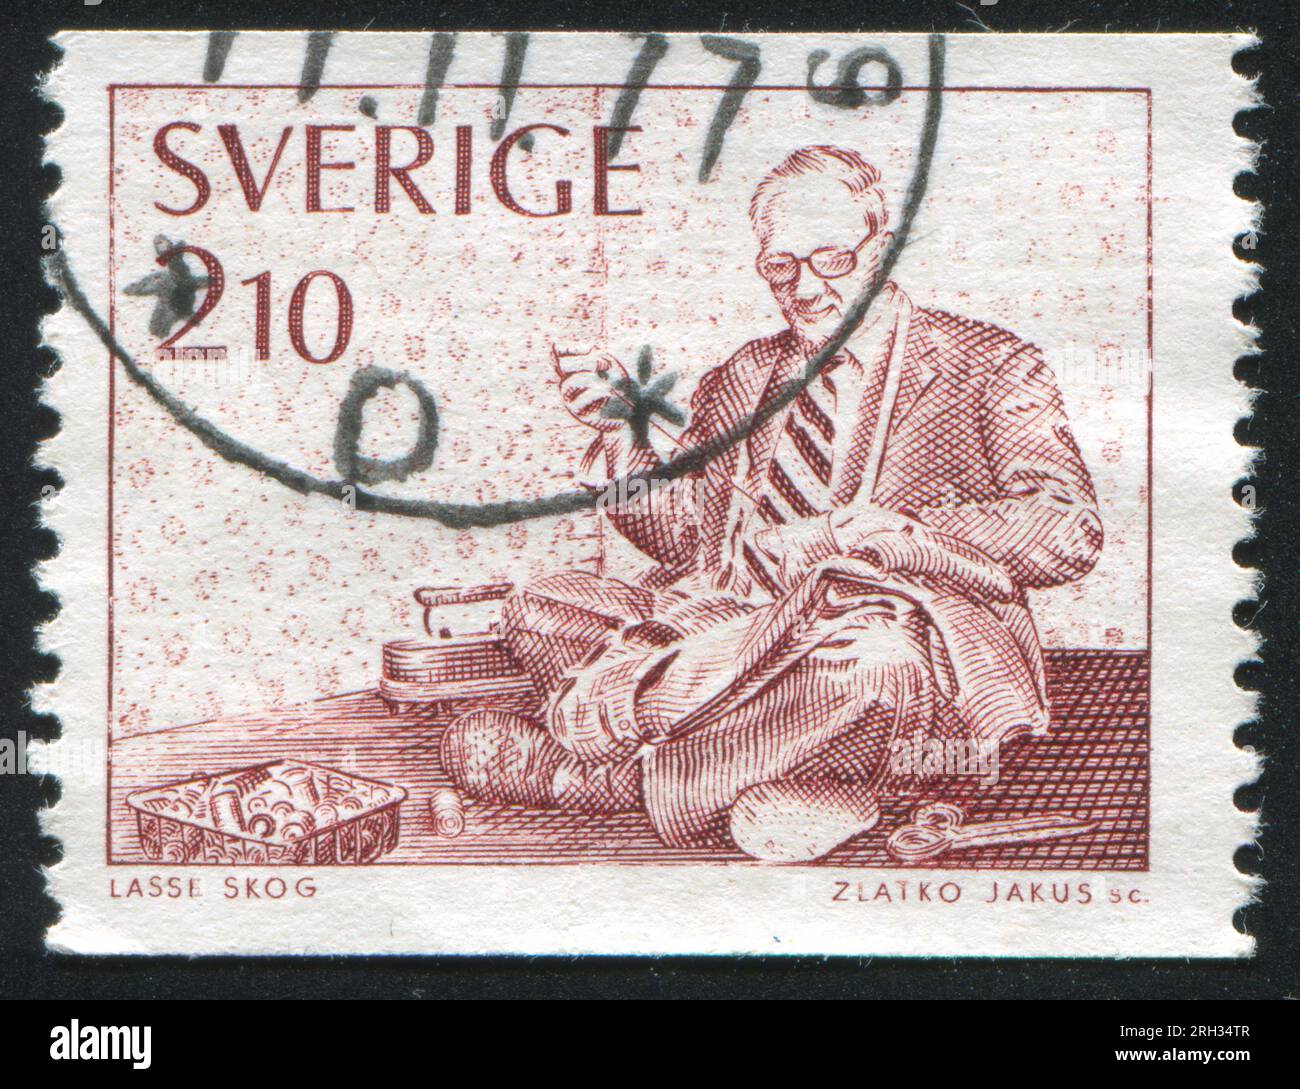 SWEDEN - CIRCA 1977: stamp printed by Sweden, shows Tailor, circa 1977 Stock Photo